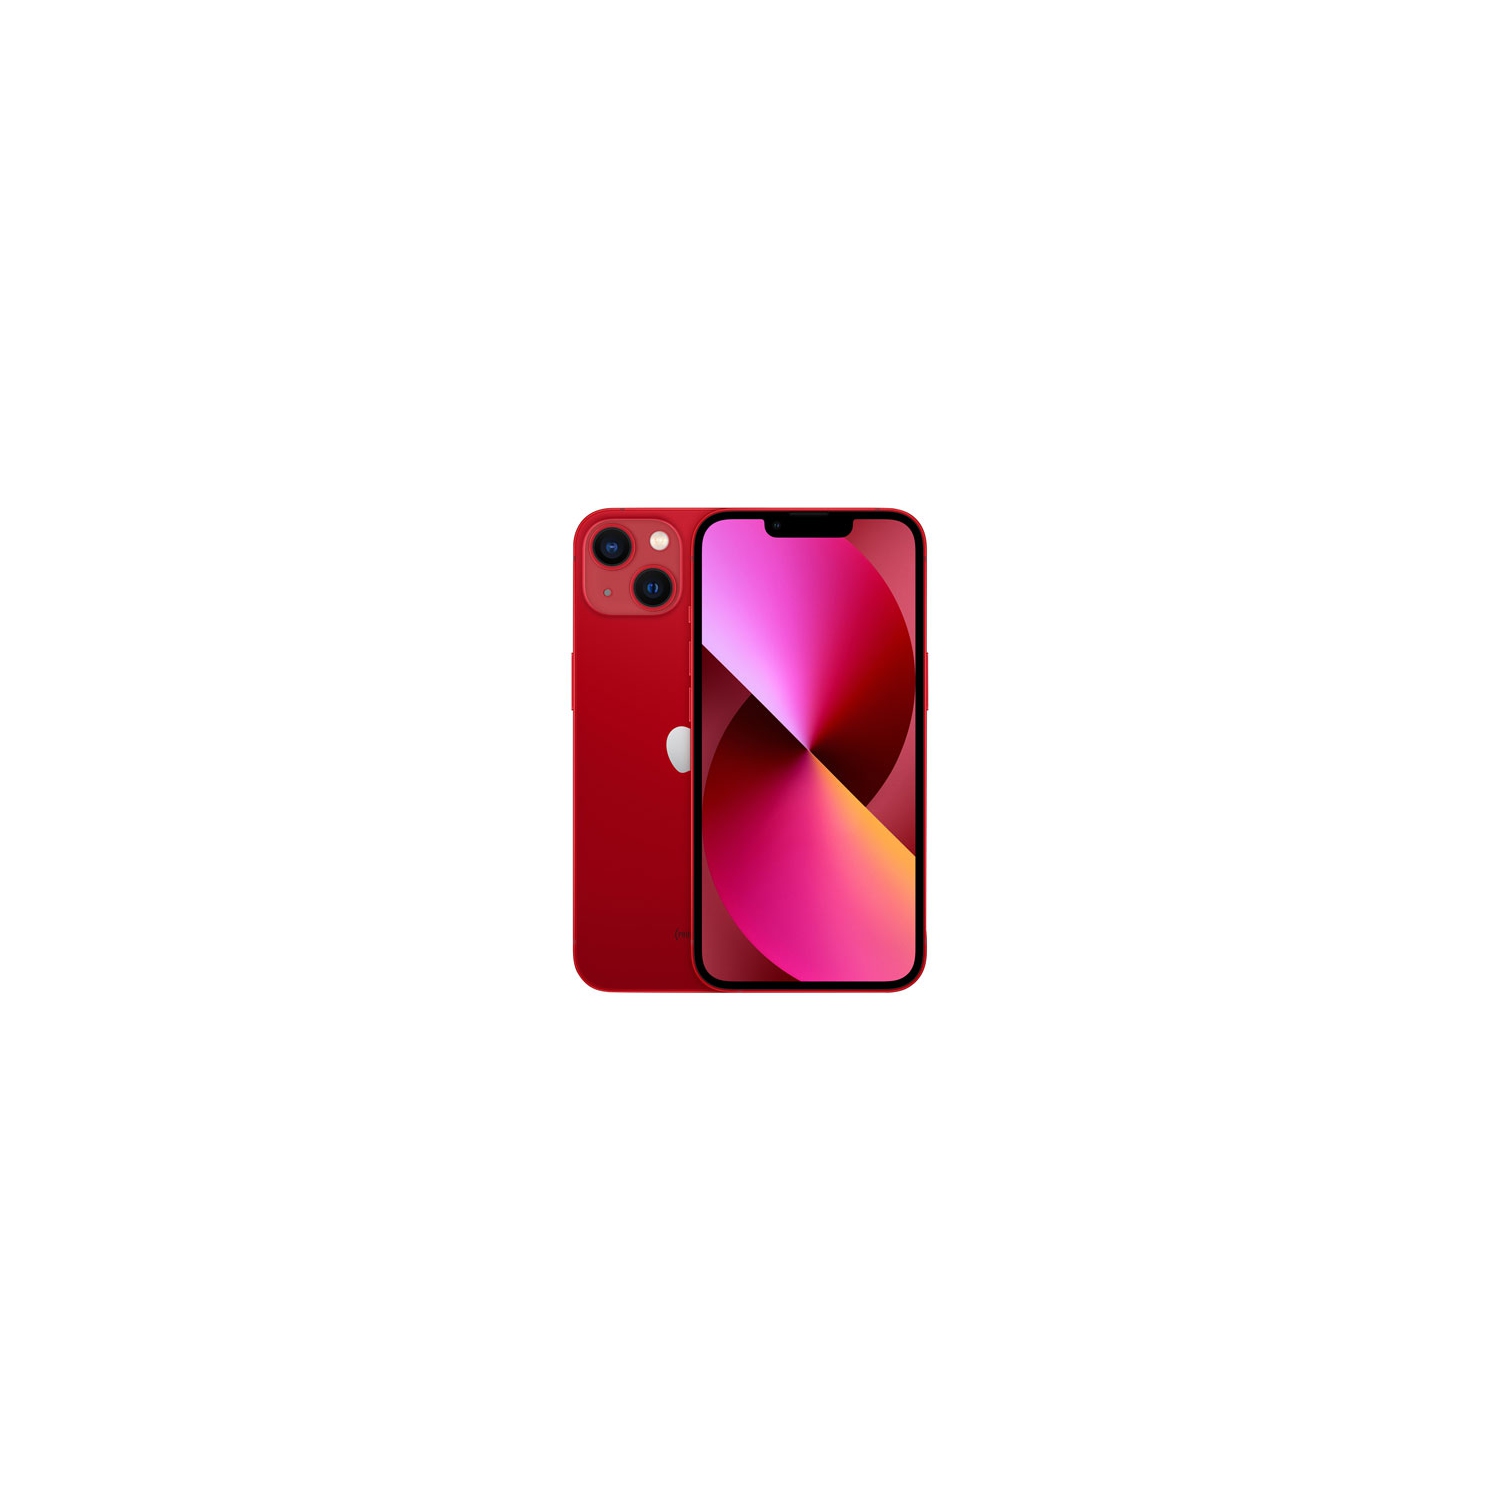 Apple iPhone 13 128GB - (PRODUCT)RED - Unlocked - Open Box